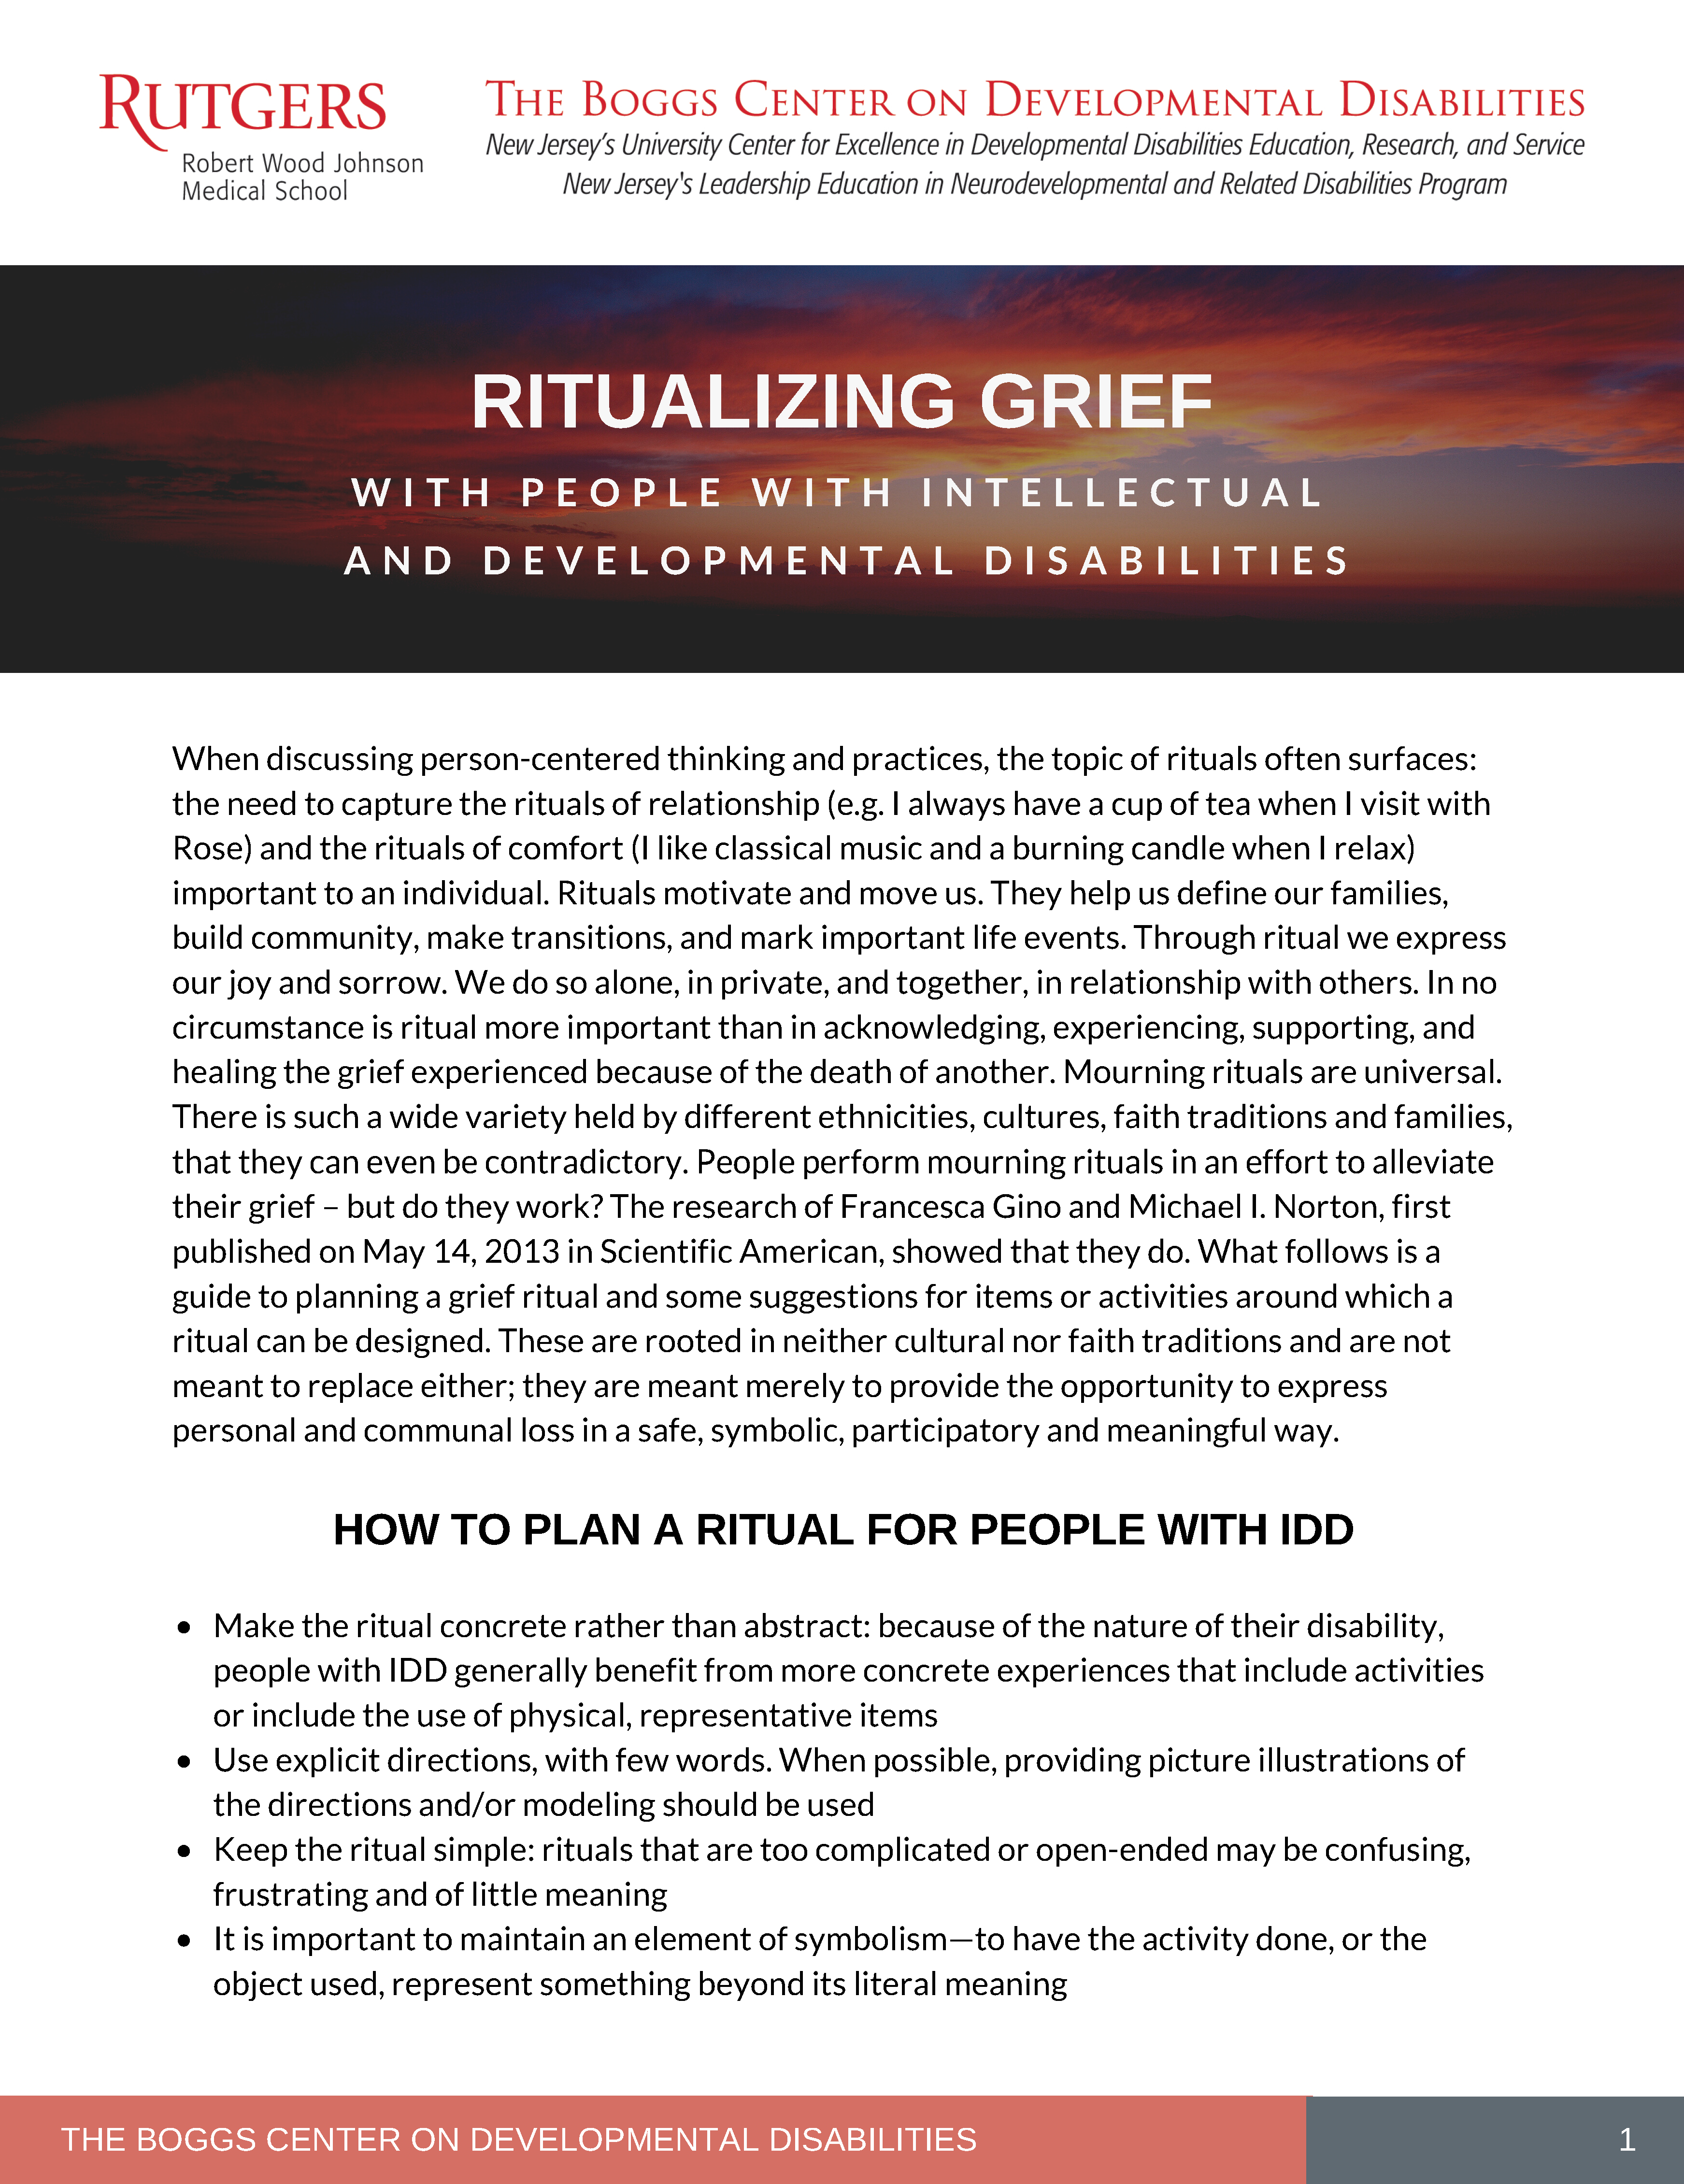 ritualizing grief cover